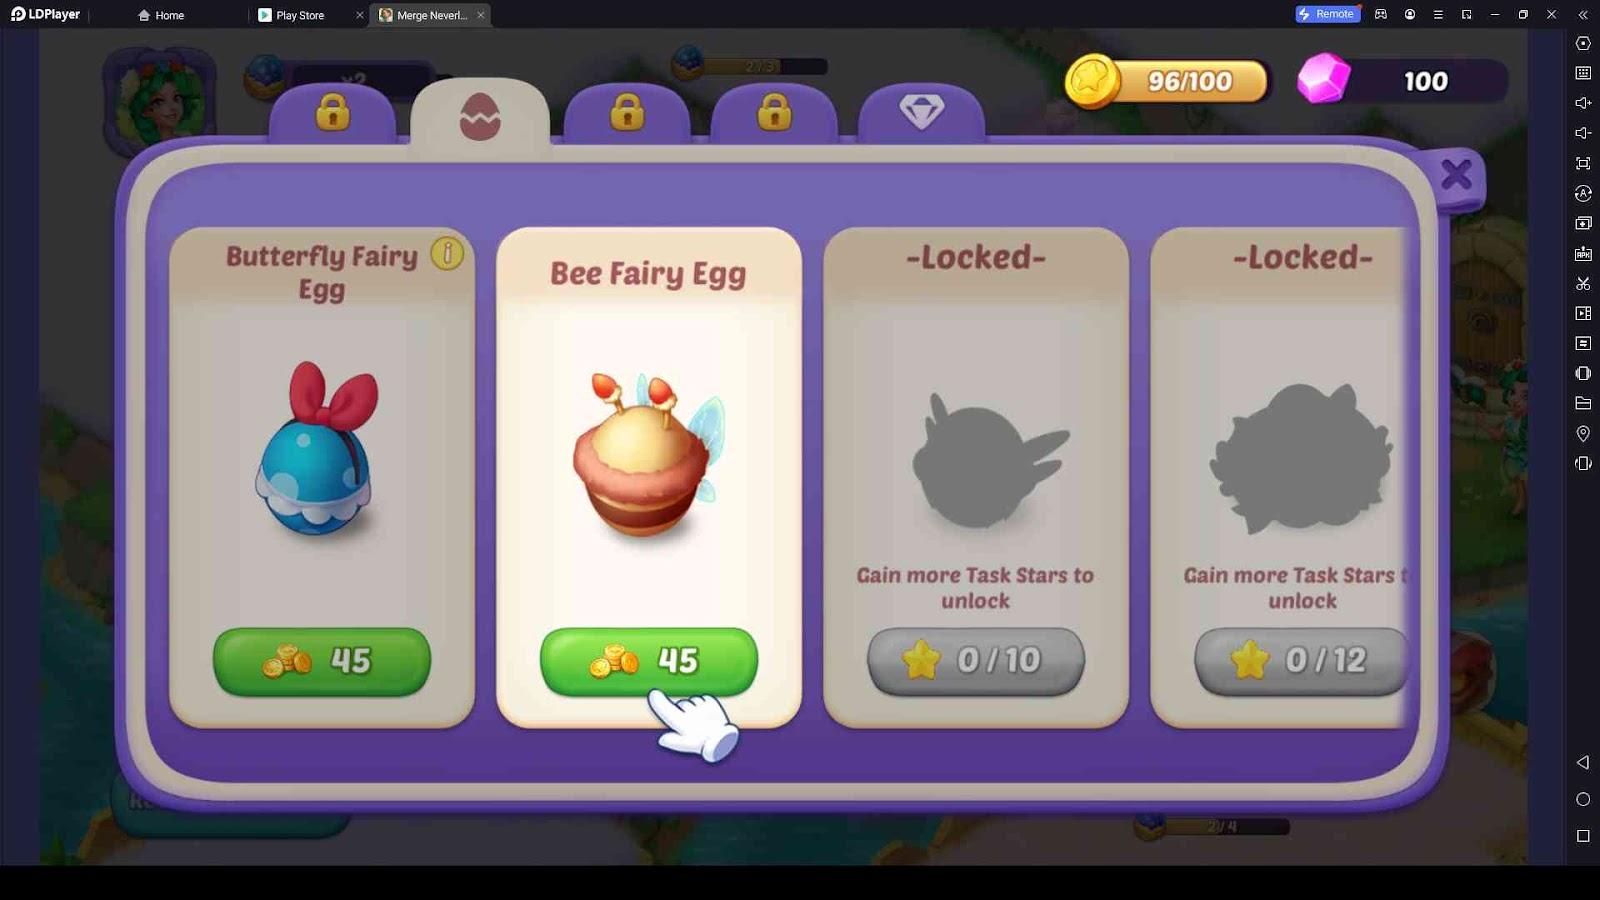 Visit the Shop to Earn More Eggs and More Items